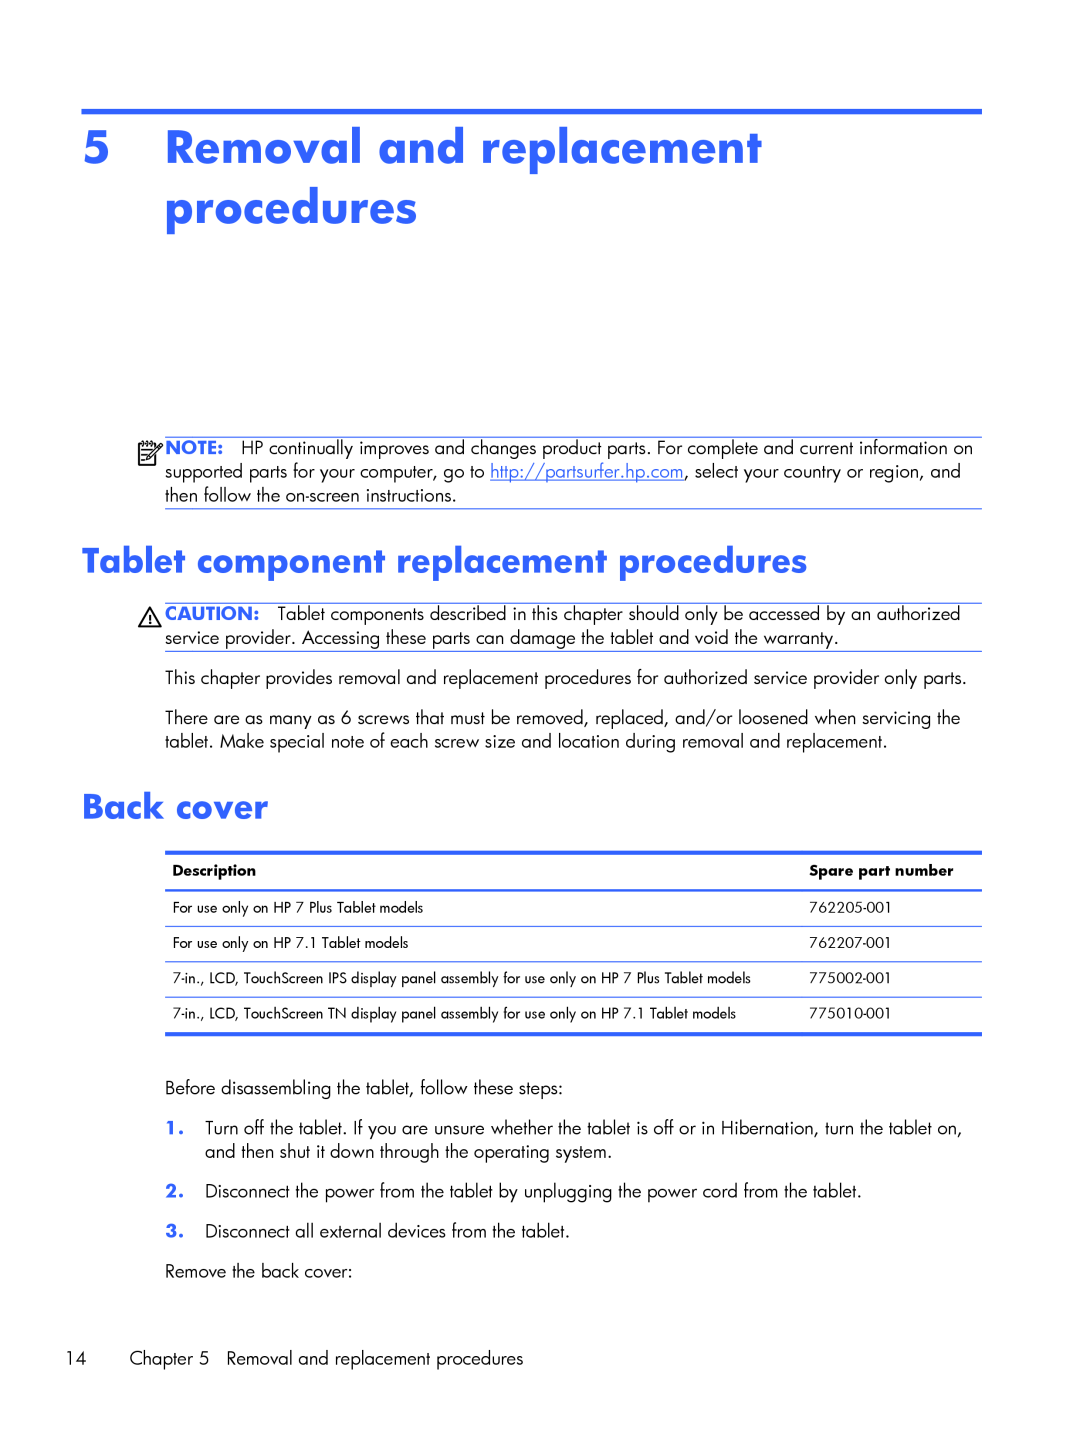 HP 7 Plus 1302us, 7 Plus 1301 manual Removal and replacement procedures, Tablet component replacement procedures, Back cover 